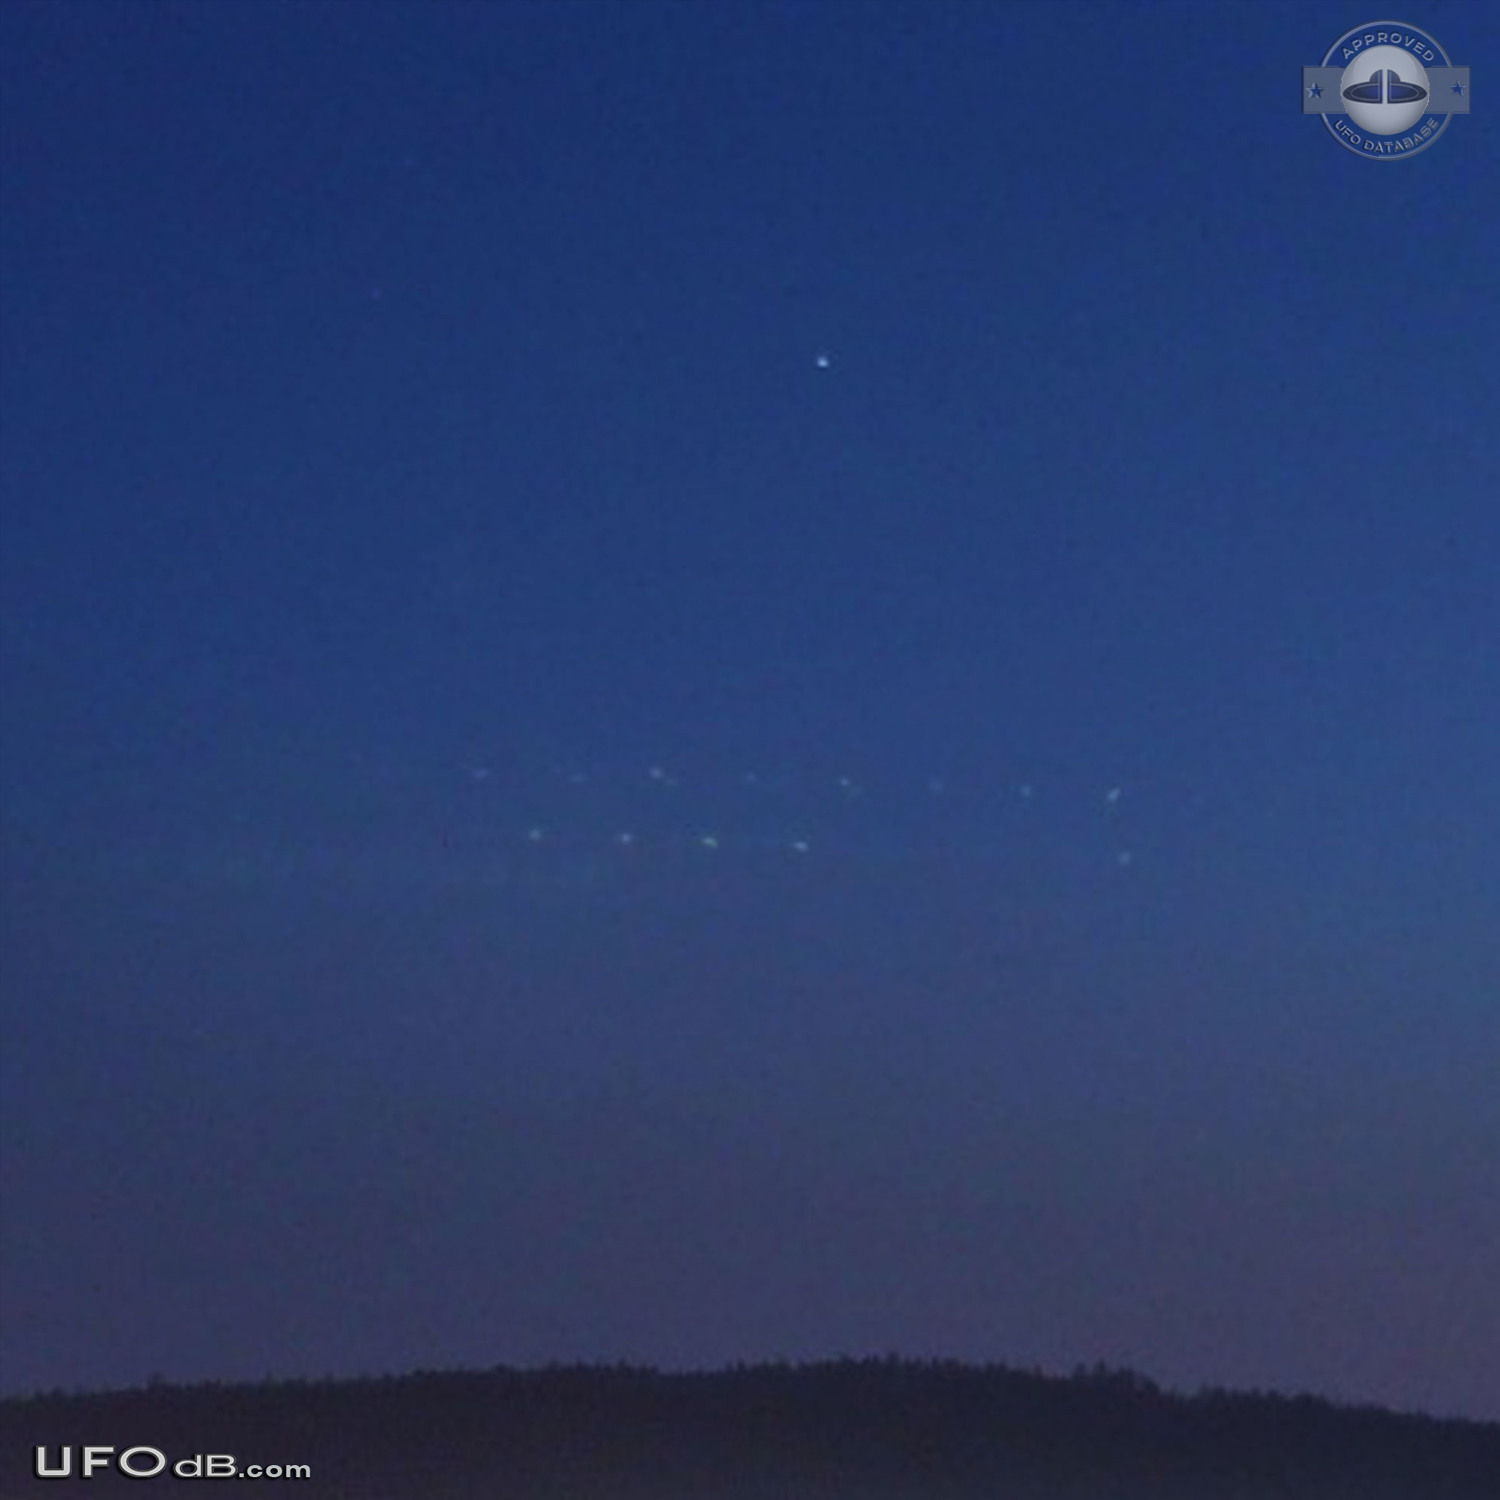 Exposure Photo capture large formation of UFOs in Czech Republic 2009 UFO Picture #444-1